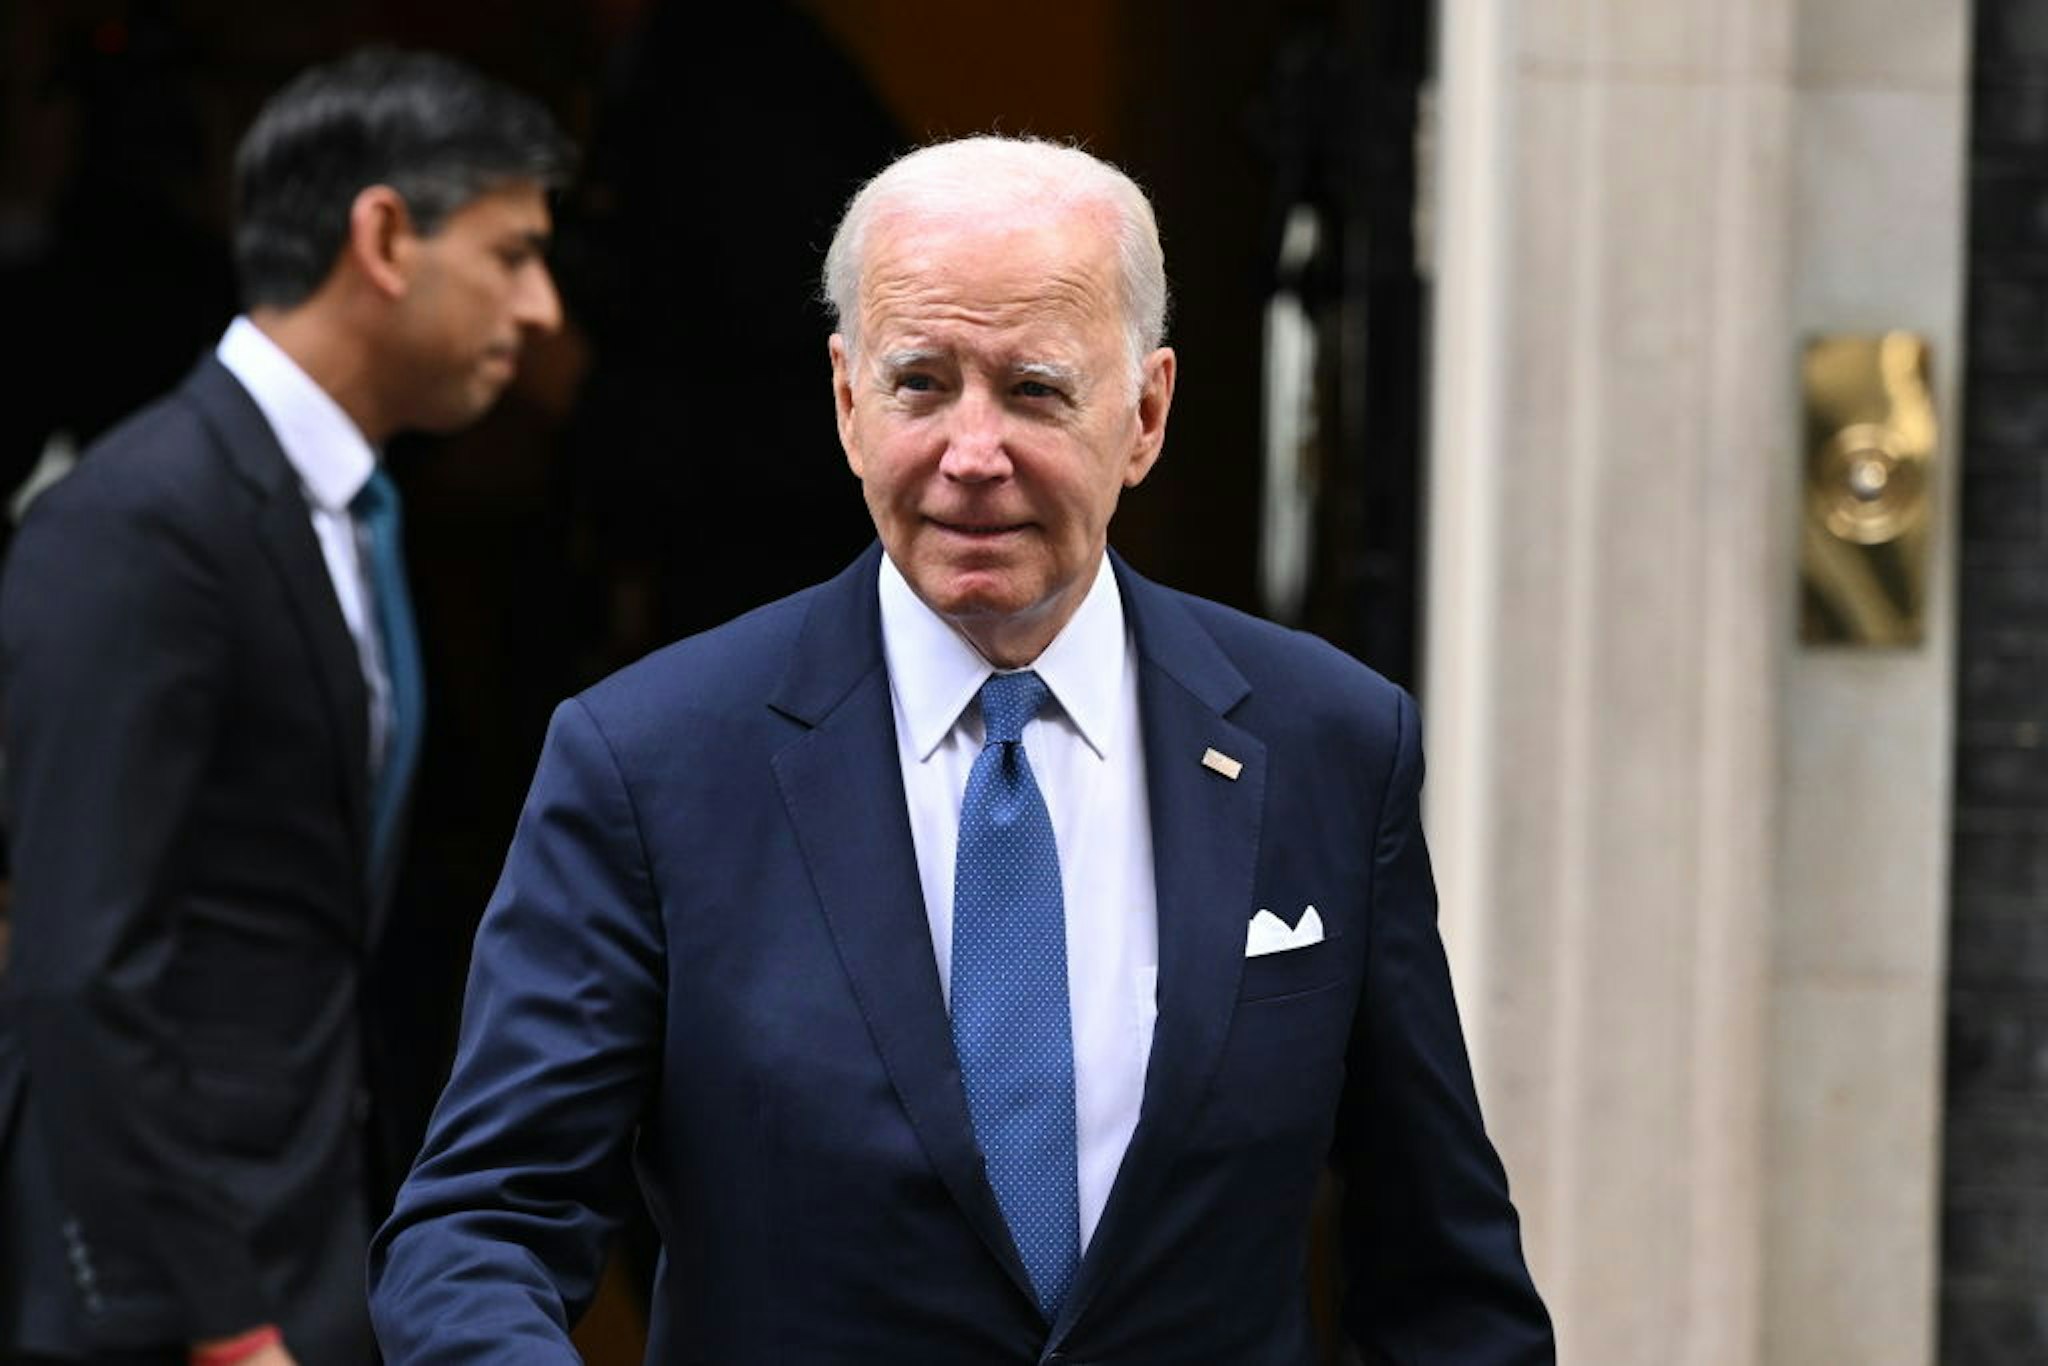 LONDON, ENGLAND - JULY 10: US President Joe Biden leaves 10 Downing Street after meeting with British Prime Minister Rishi Sunak (L) on July 10, 2023 in London, England. The President is visiting the UK to further strengthen the close relationship between the two nations and to discuss climate issues with King Charles at Windsor Castle. (Photo by Leon Neal/Getty Images)